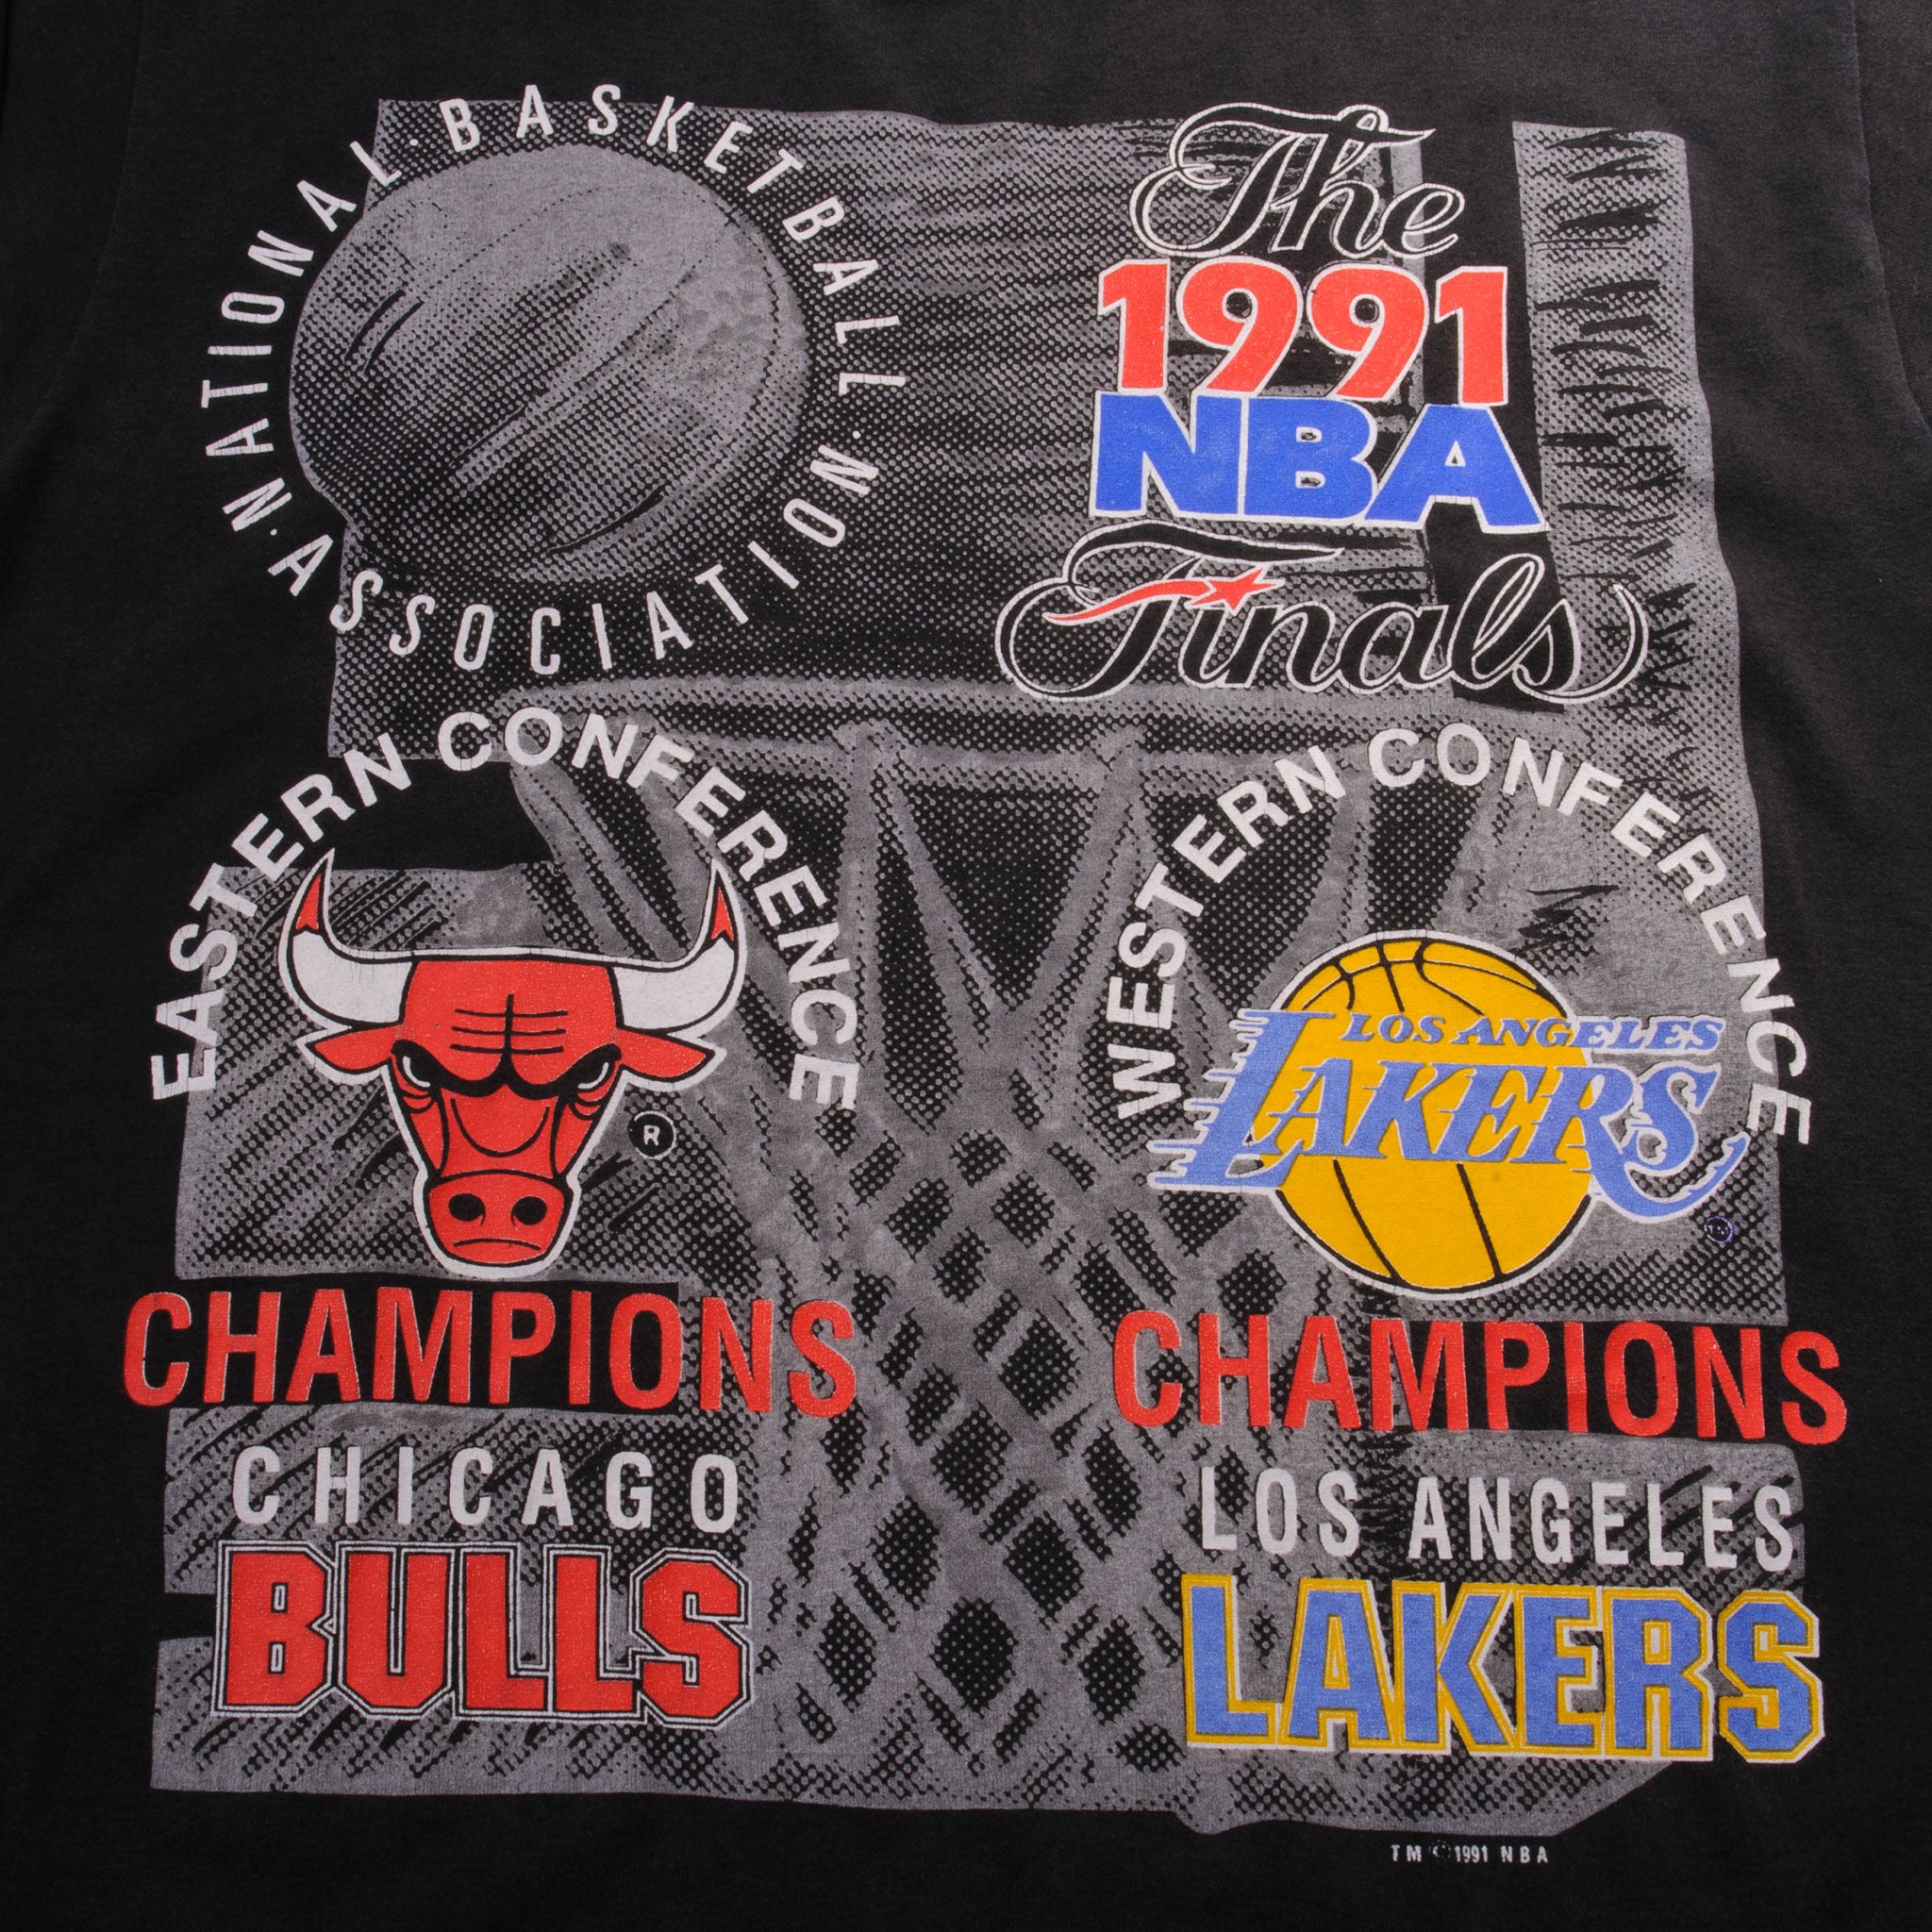 NBA Style, Chicago Bulls and Lakers Clothes